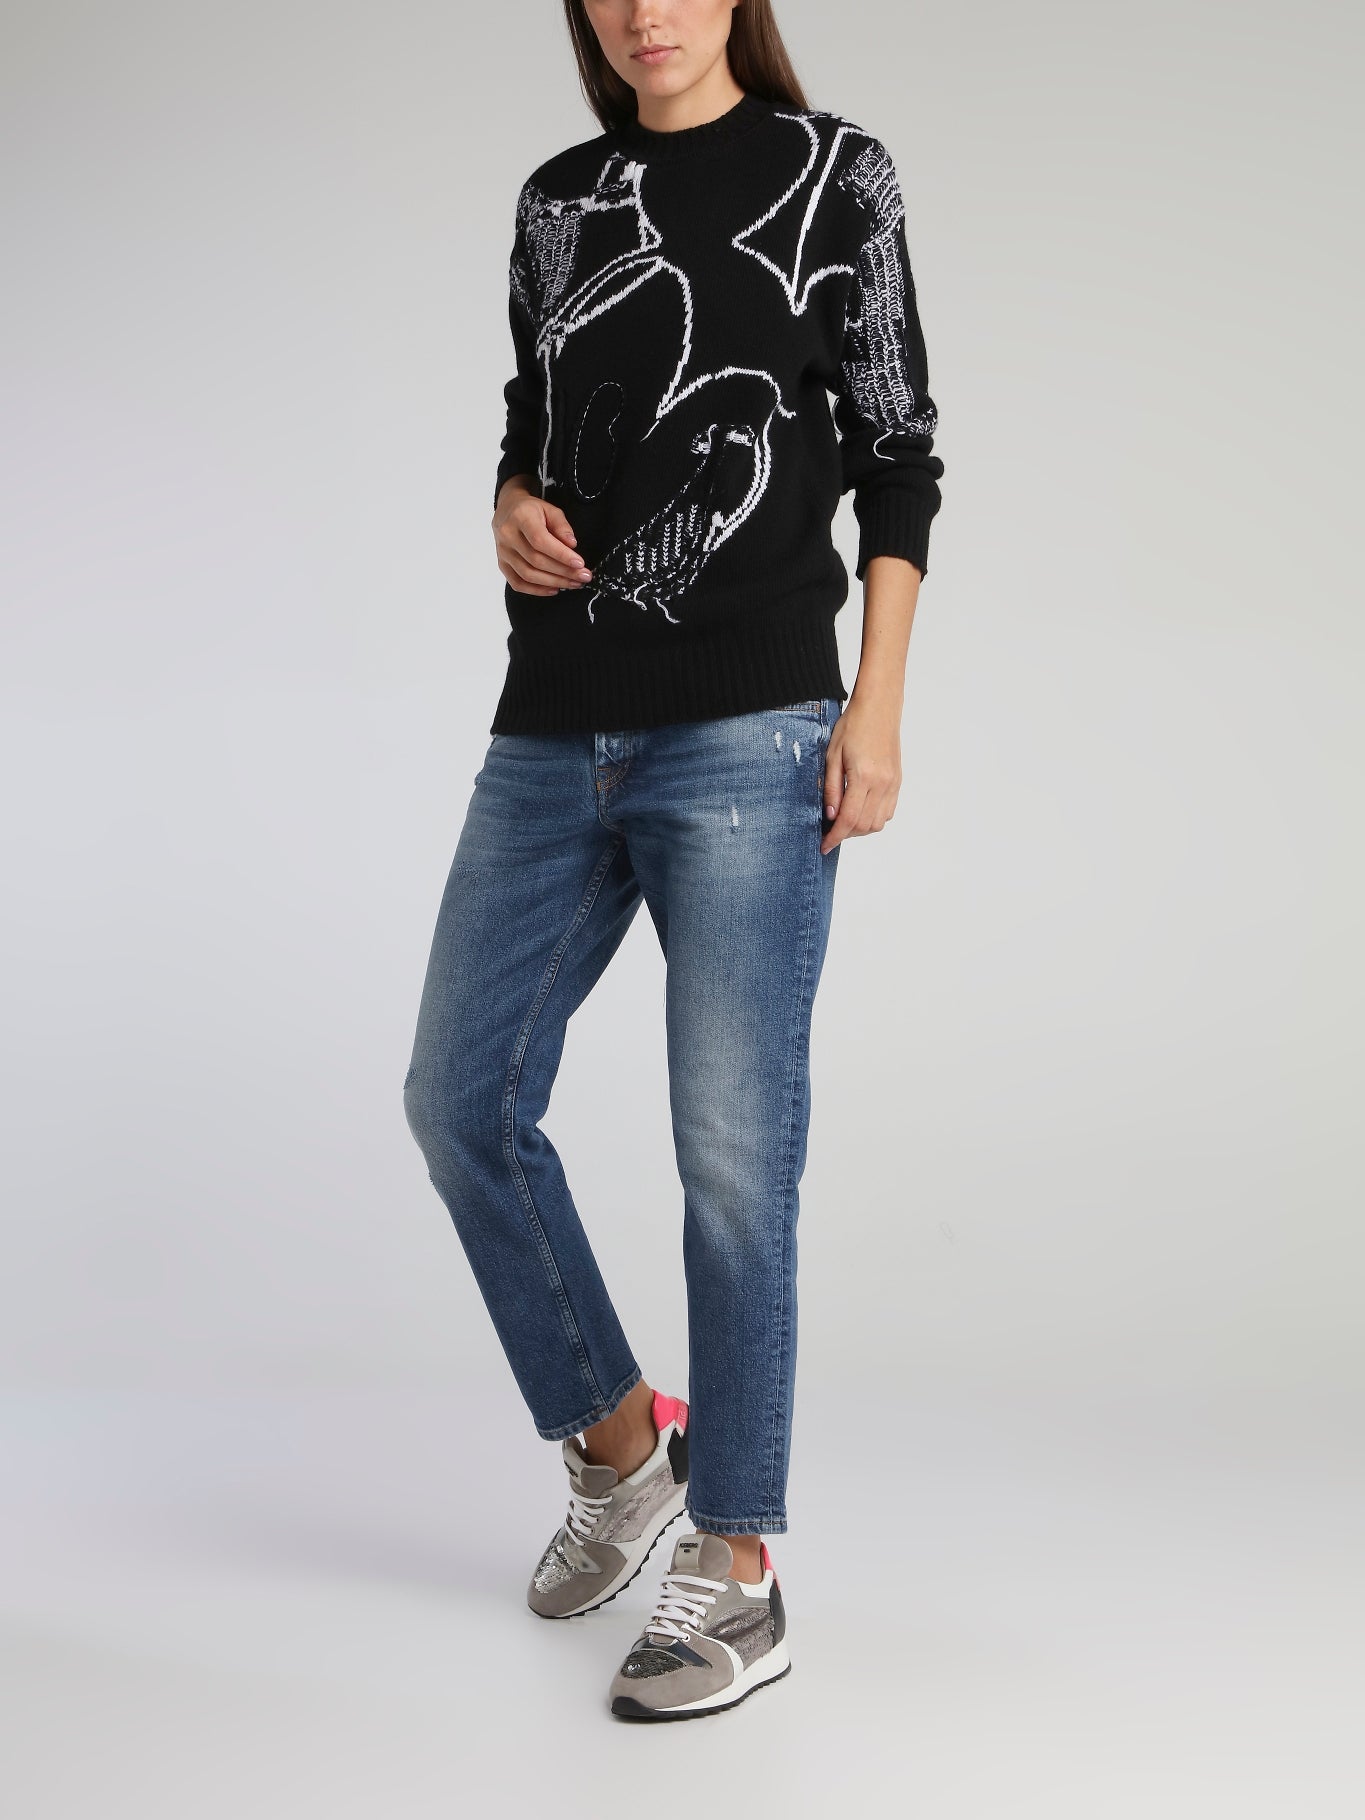 Mickey Mouse Black Contrast Sweater